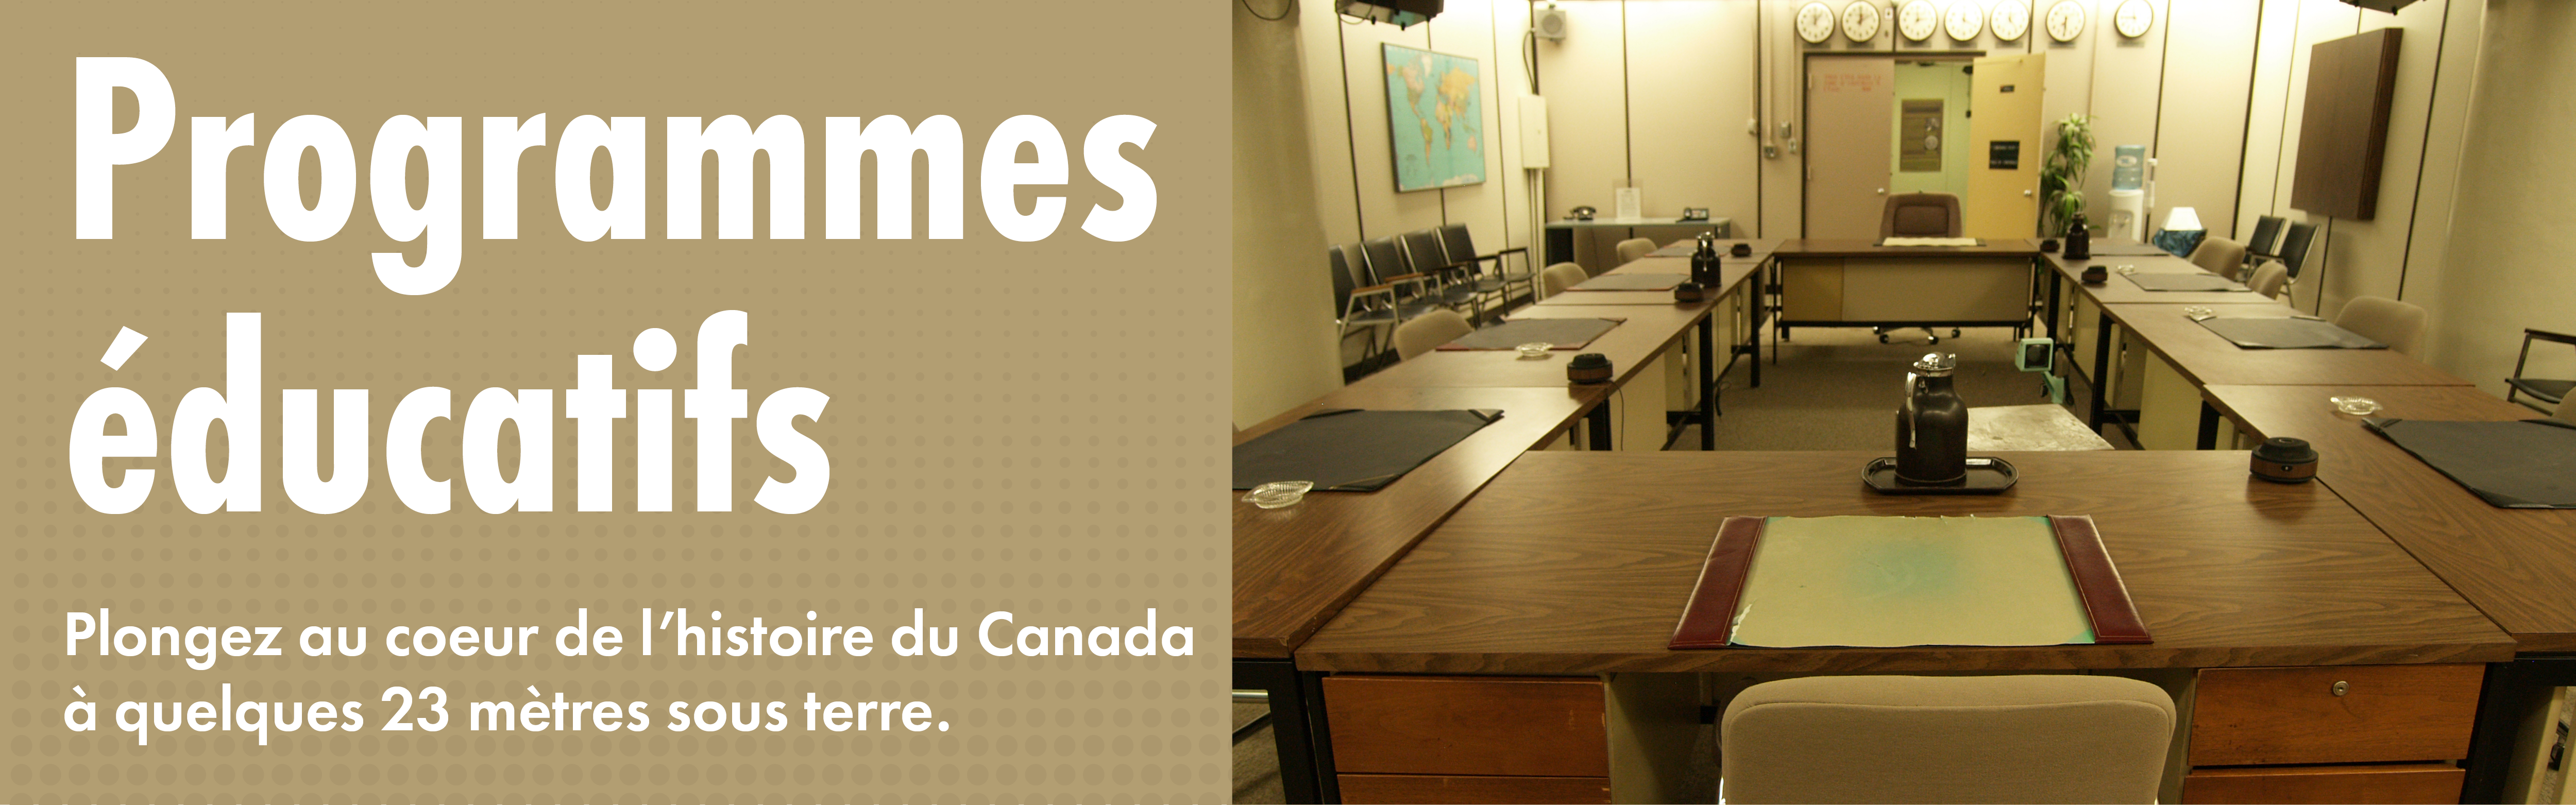 White text on a textured beige background reads "Educational Programs: Immerse yourselves in Canadian history, 75 ft underground." An image on the right shows the square of tables and chairs set up inside the War Cabinet Room at the Diefenbunker.